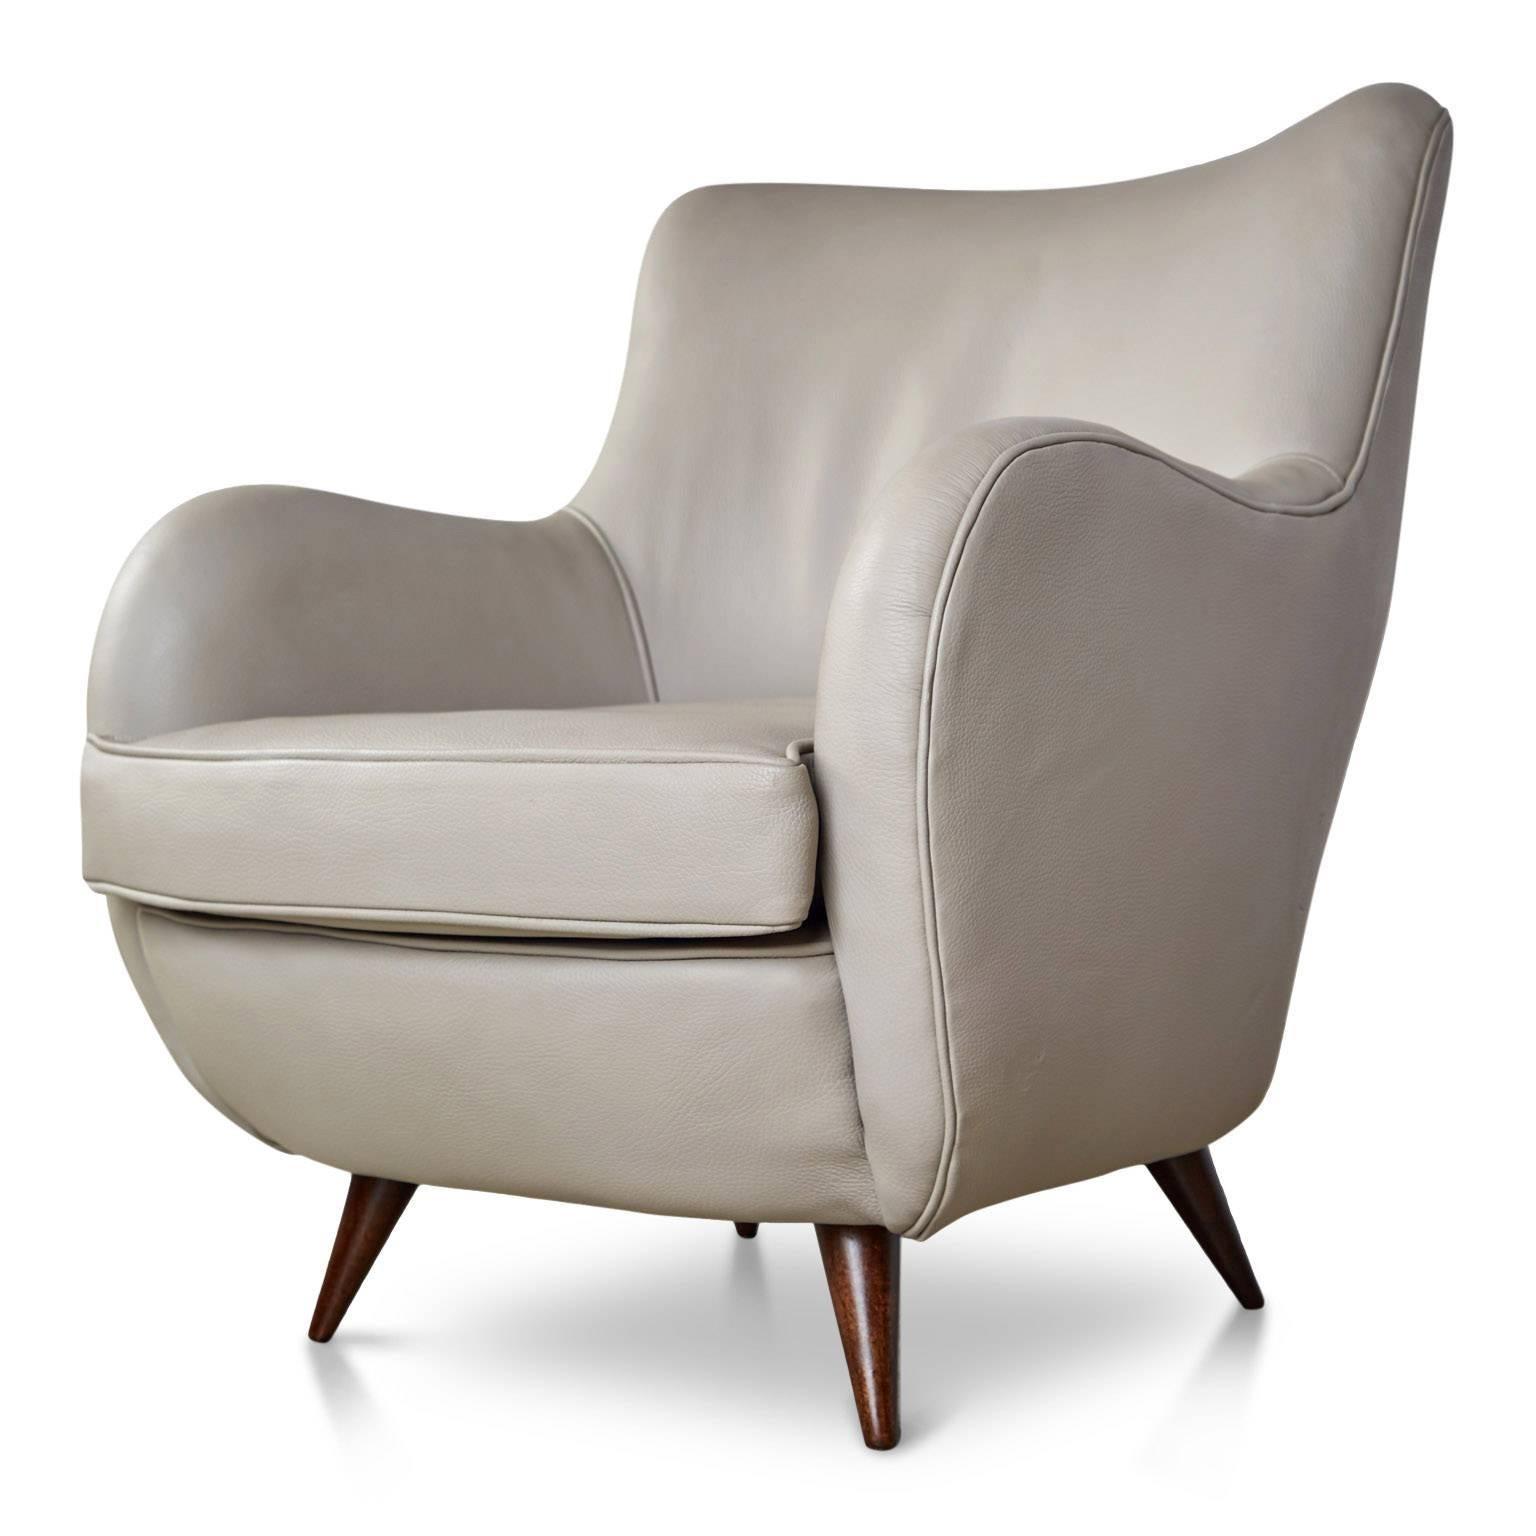 Two sculptural leather armchairs on solid Caviuna wood legs which have been recently refinished and the seat has been newly upholstered in an on-trend light gray leather. Featuring a curvaceous Silhouette and deep seating these lounge chairs are